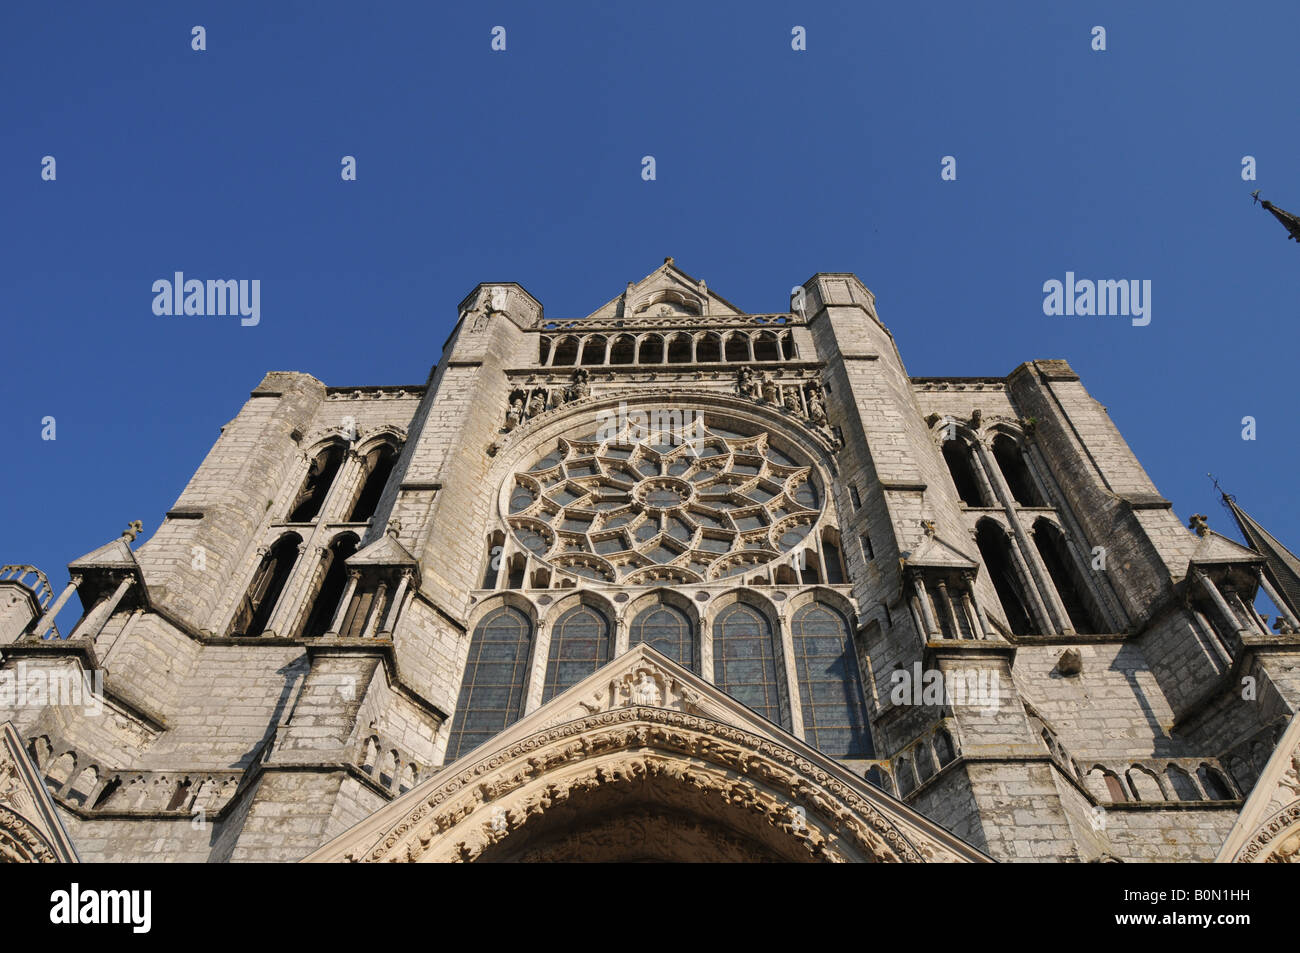 The tower and rose window above the west portal -the Royal Portal- at Chartres Cathedral, France. Stock Photo